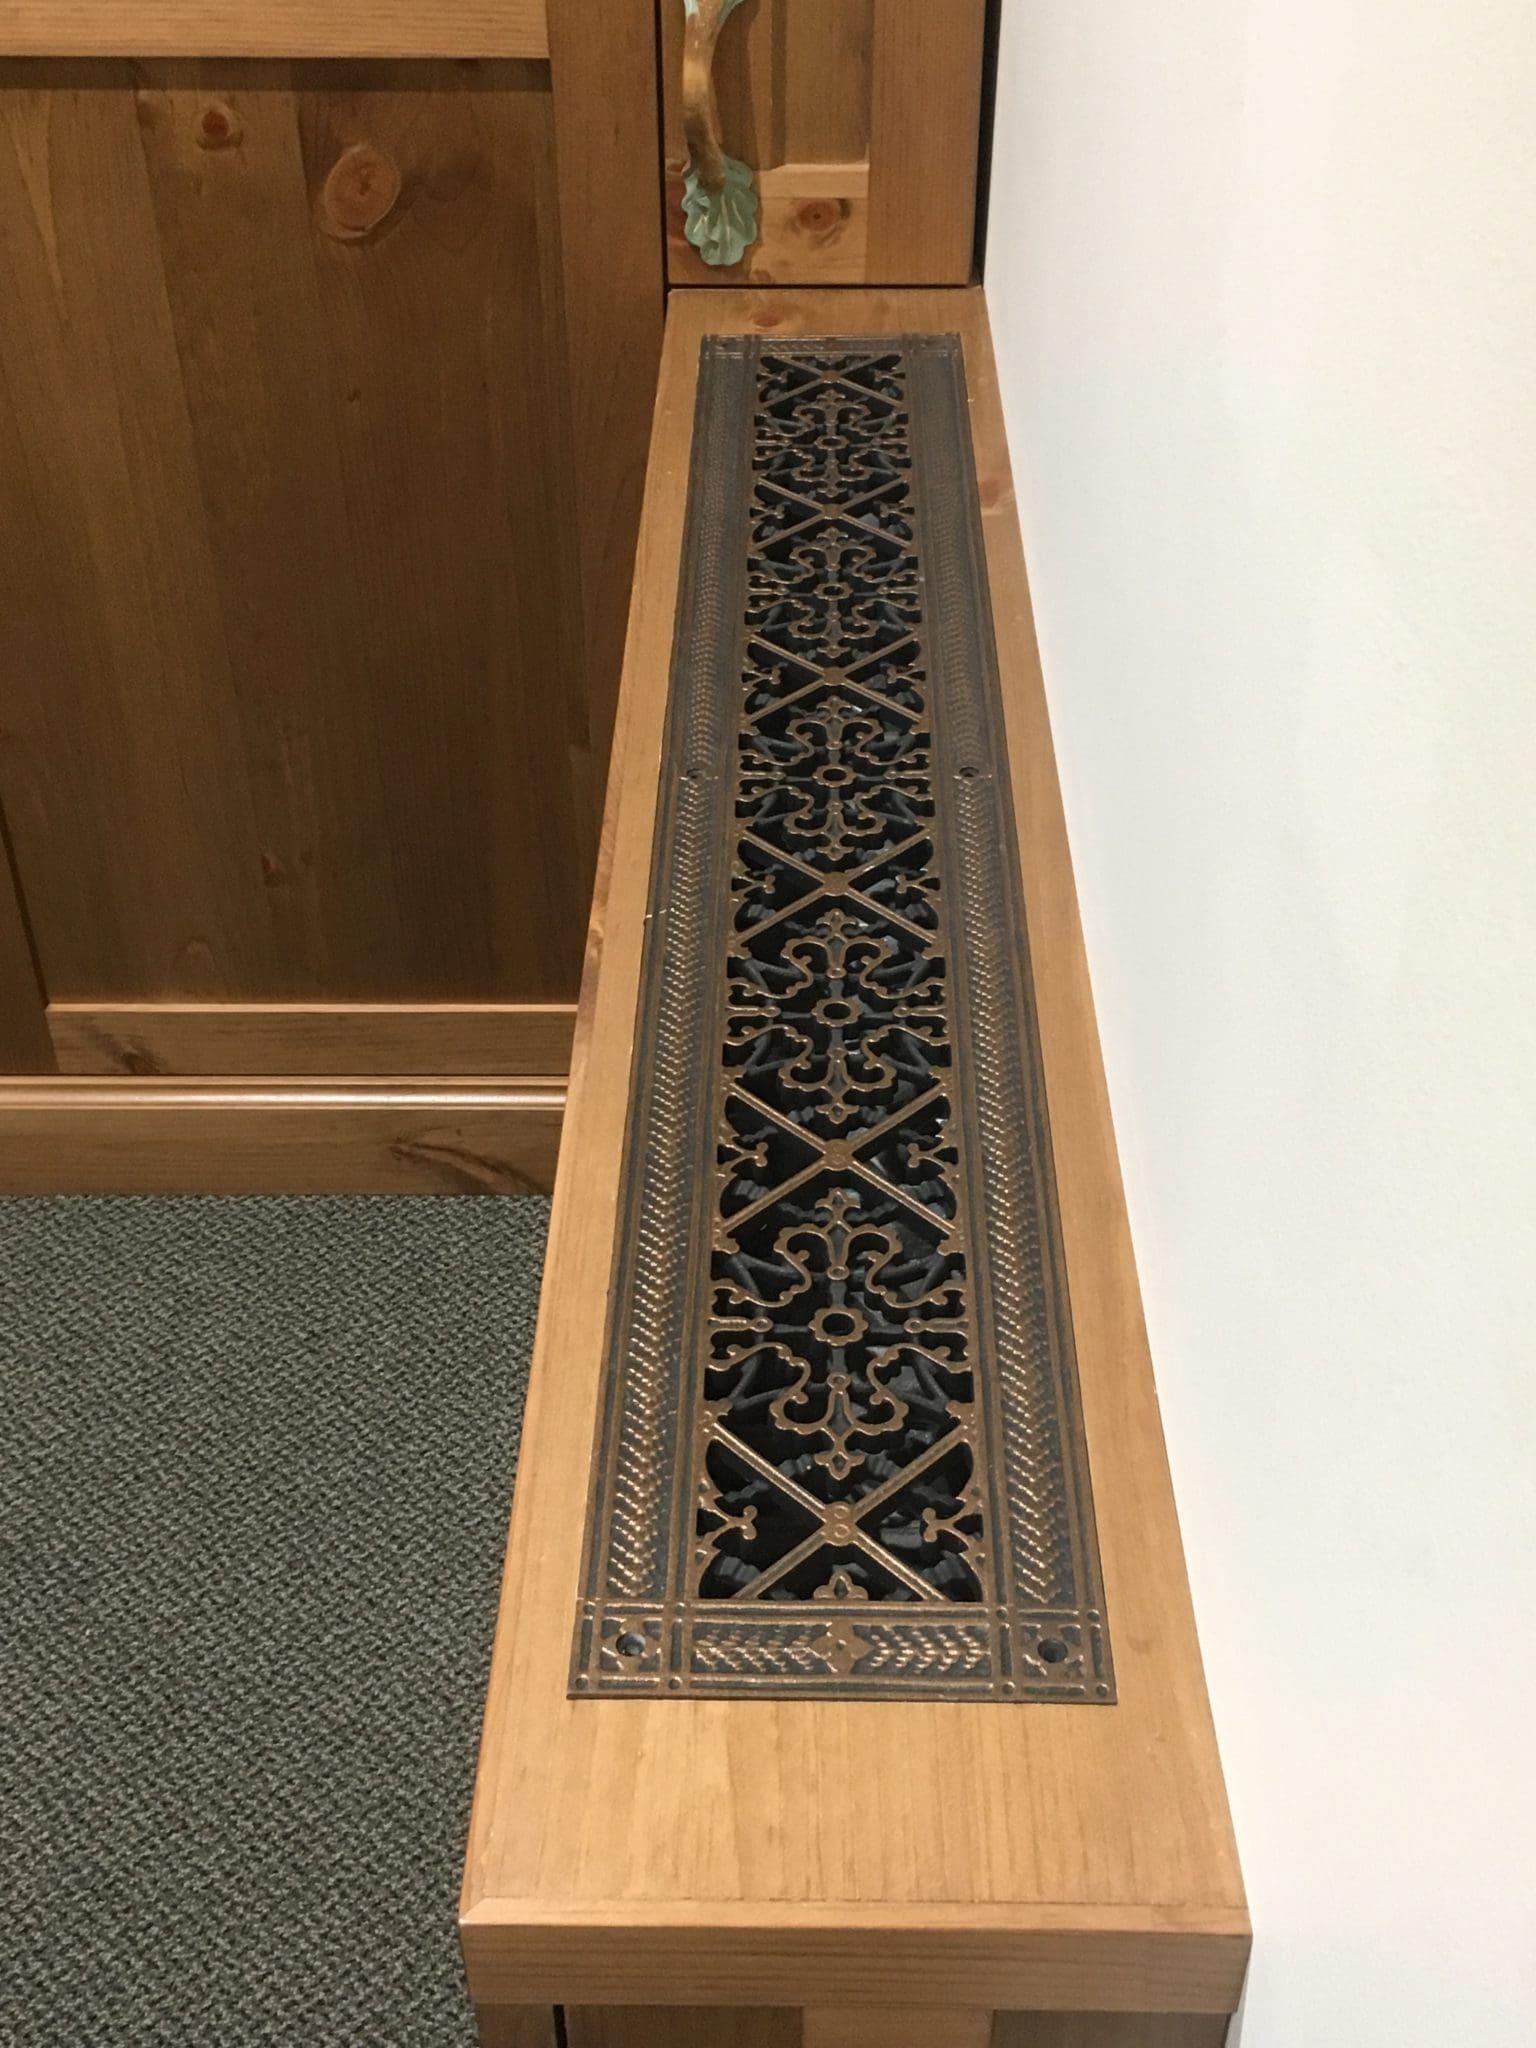 radiator cover grille in Arts and Crafts Style